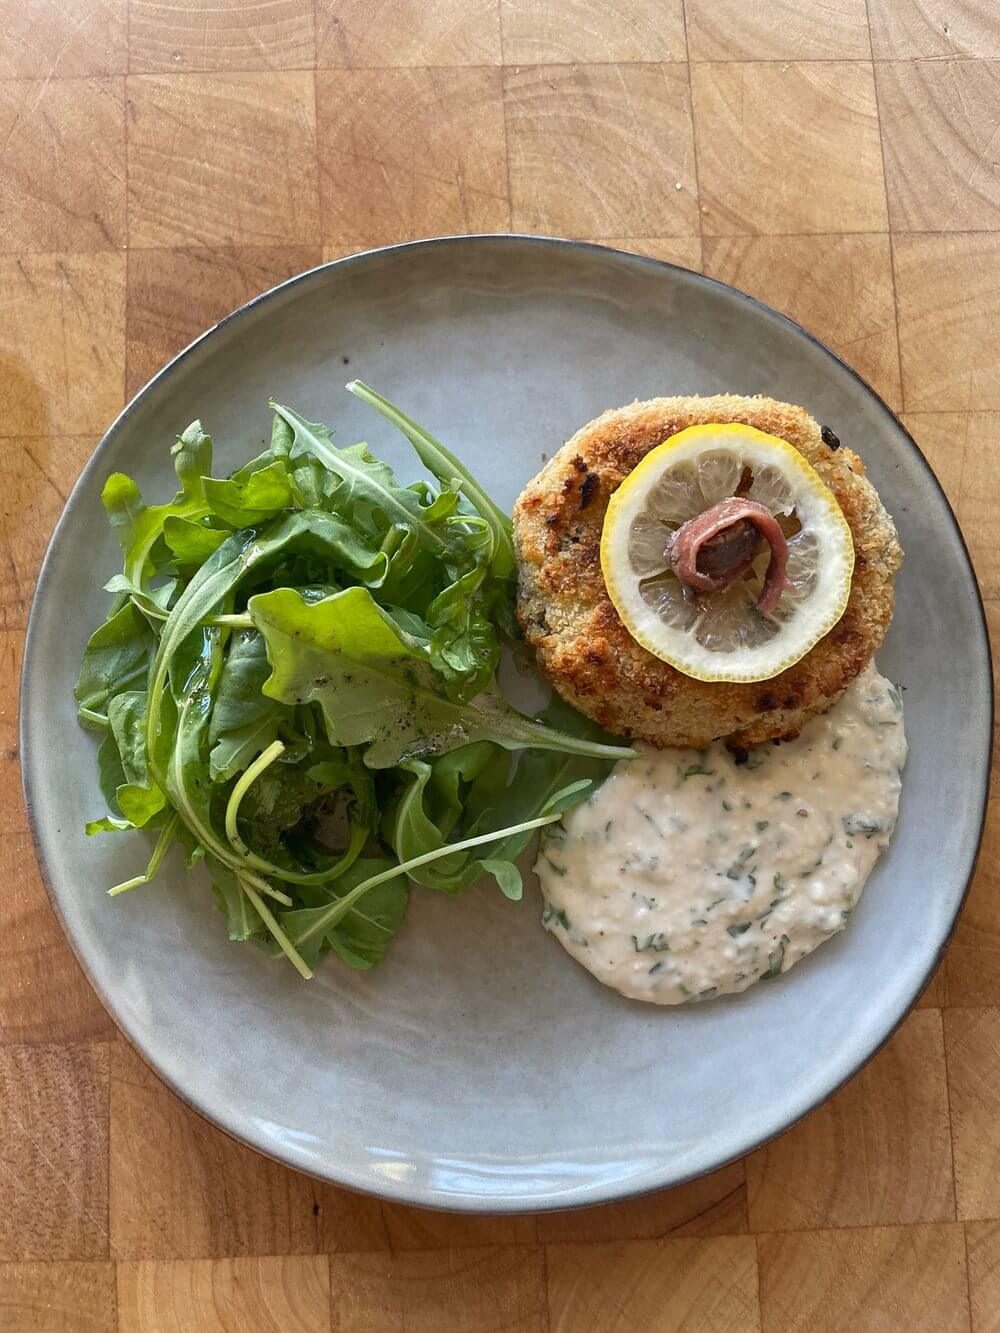 TUNA & ANCHOVY FISH CAKES, WITH PARSLEY & CAPER SAUCE